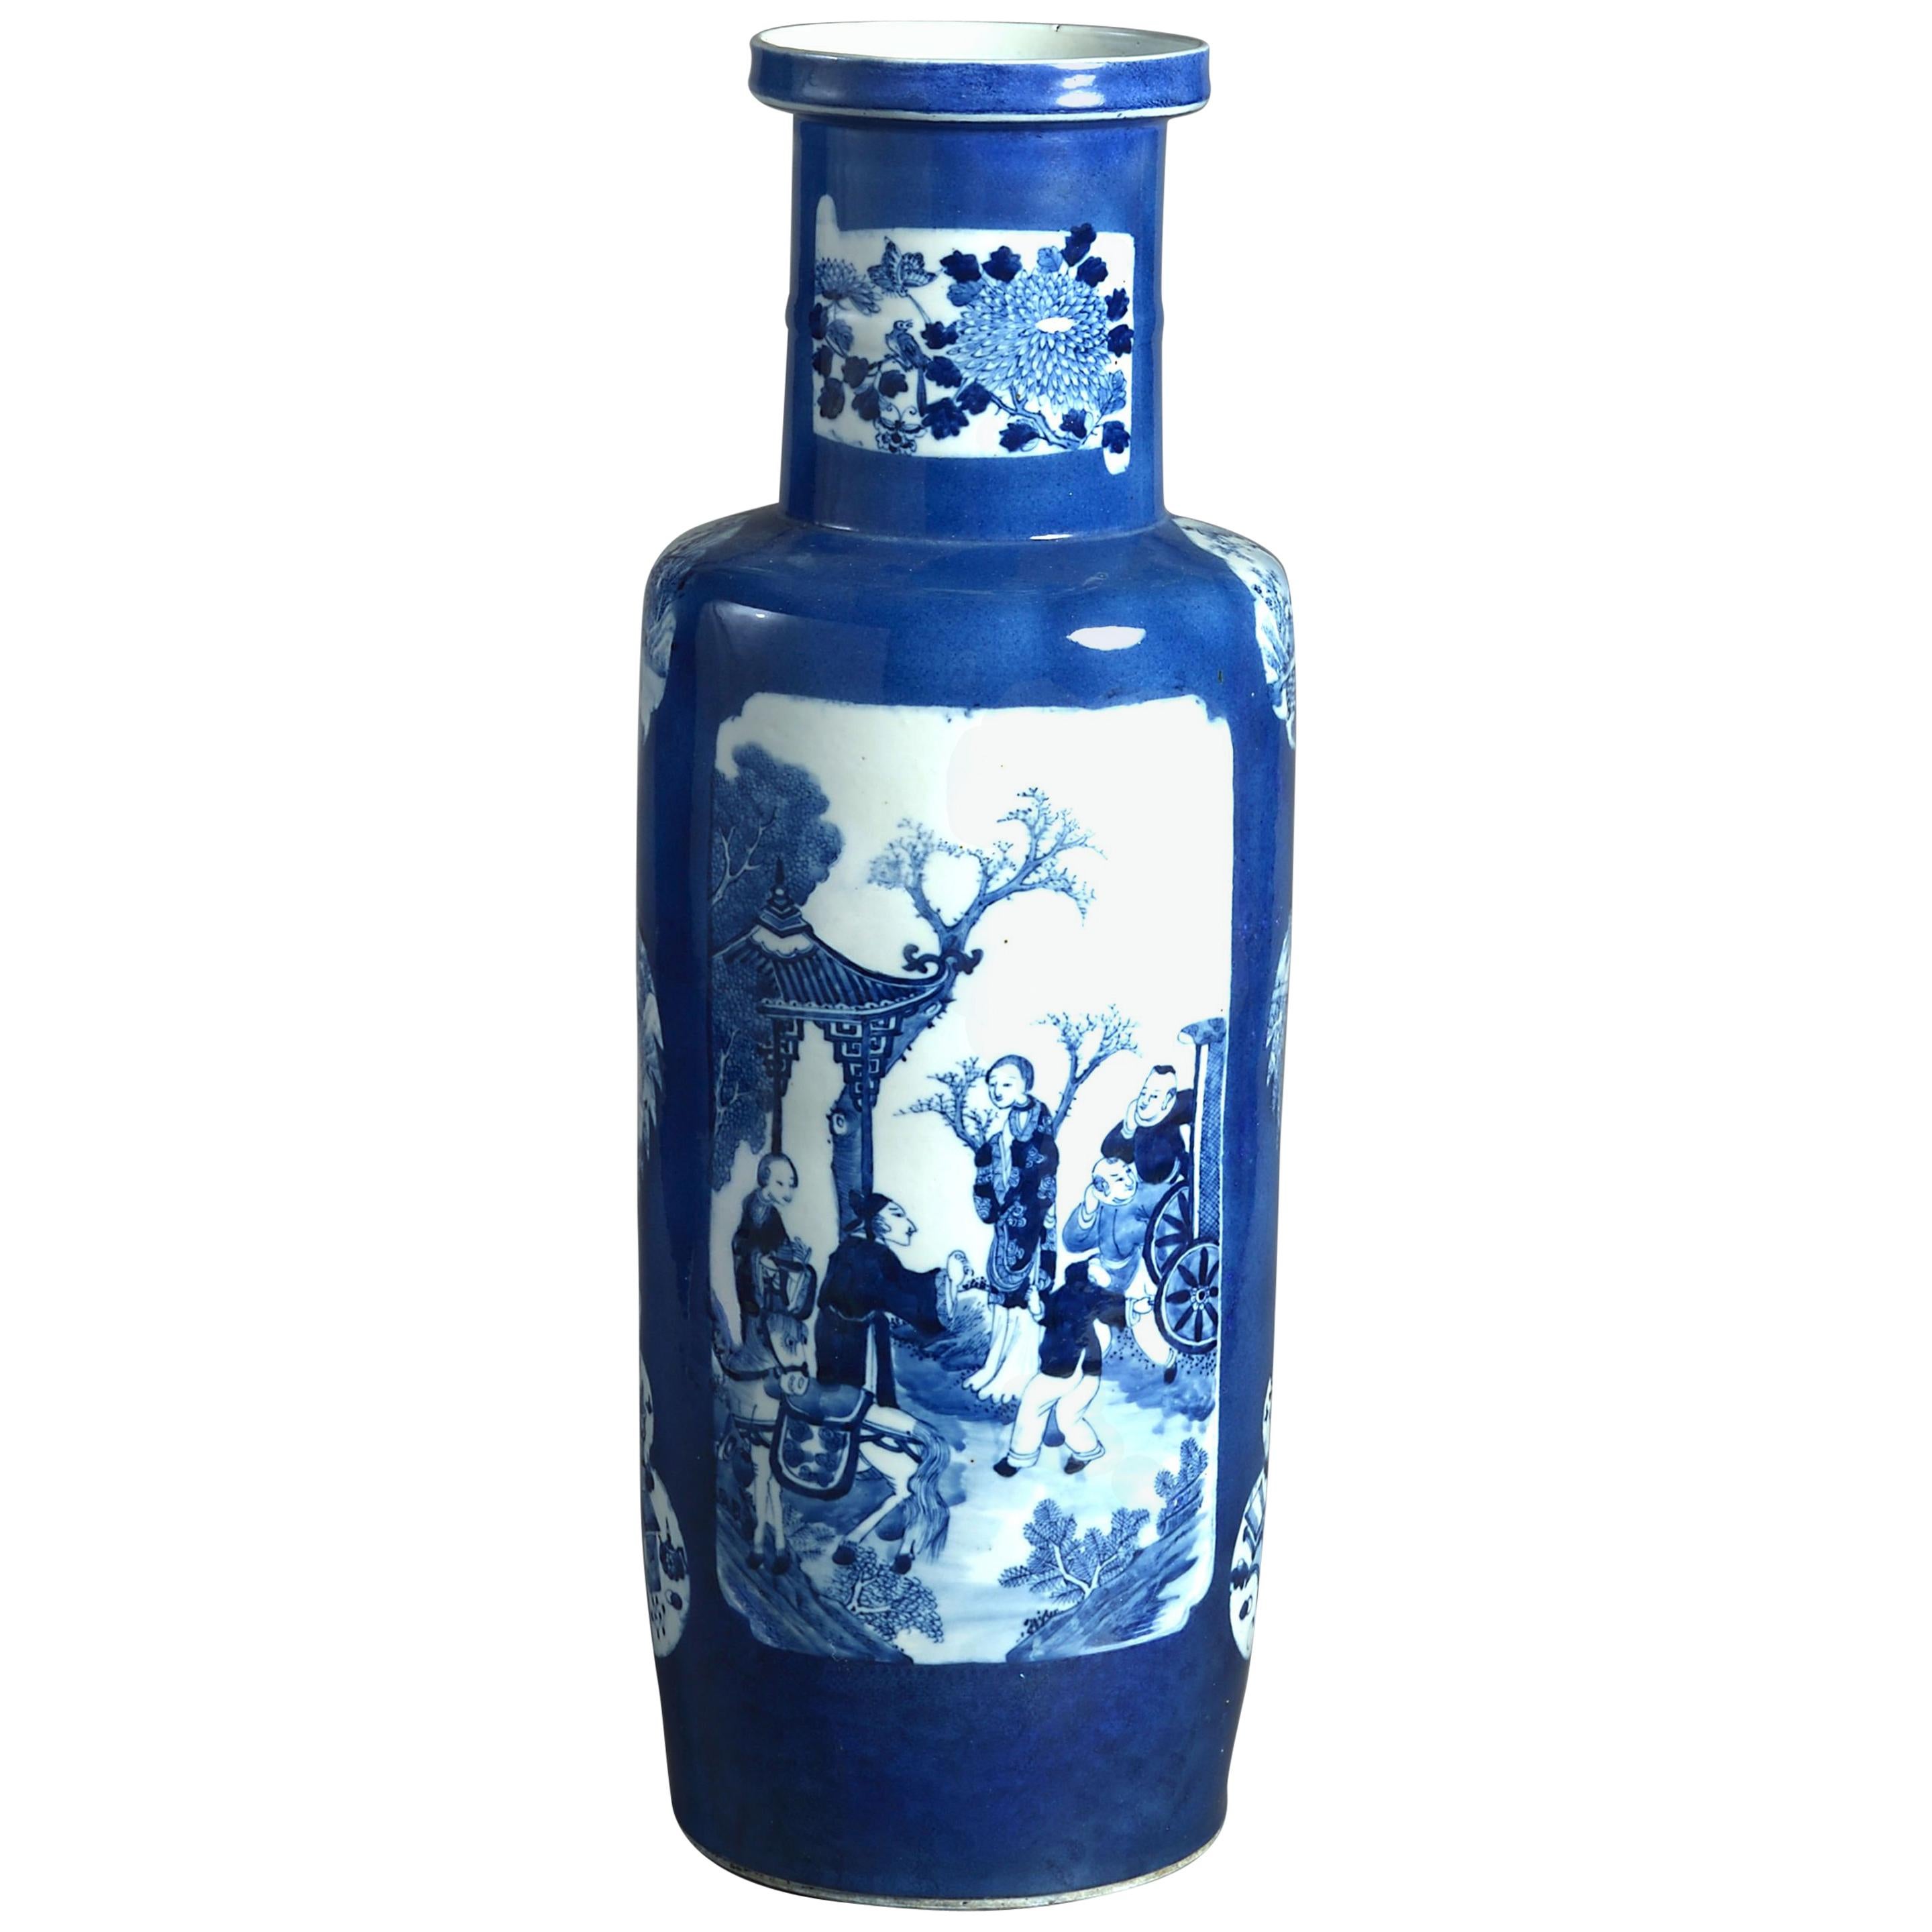 Large 19th Century Blue and White Porcelain Rouleau Vase